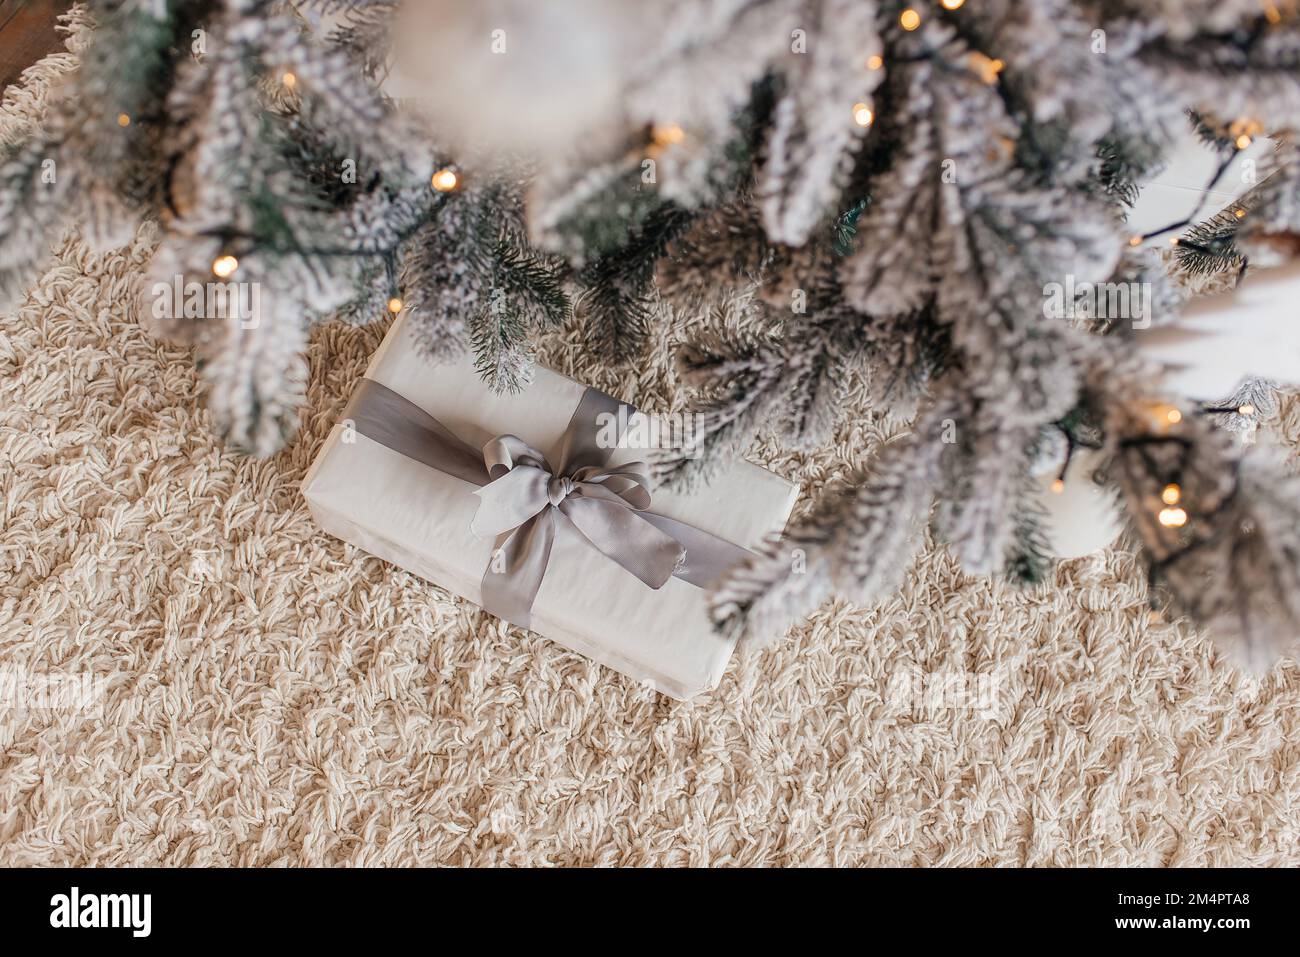 Presents and Gifts under Christmas Tree, Winter Holiday Concept Stock Photo